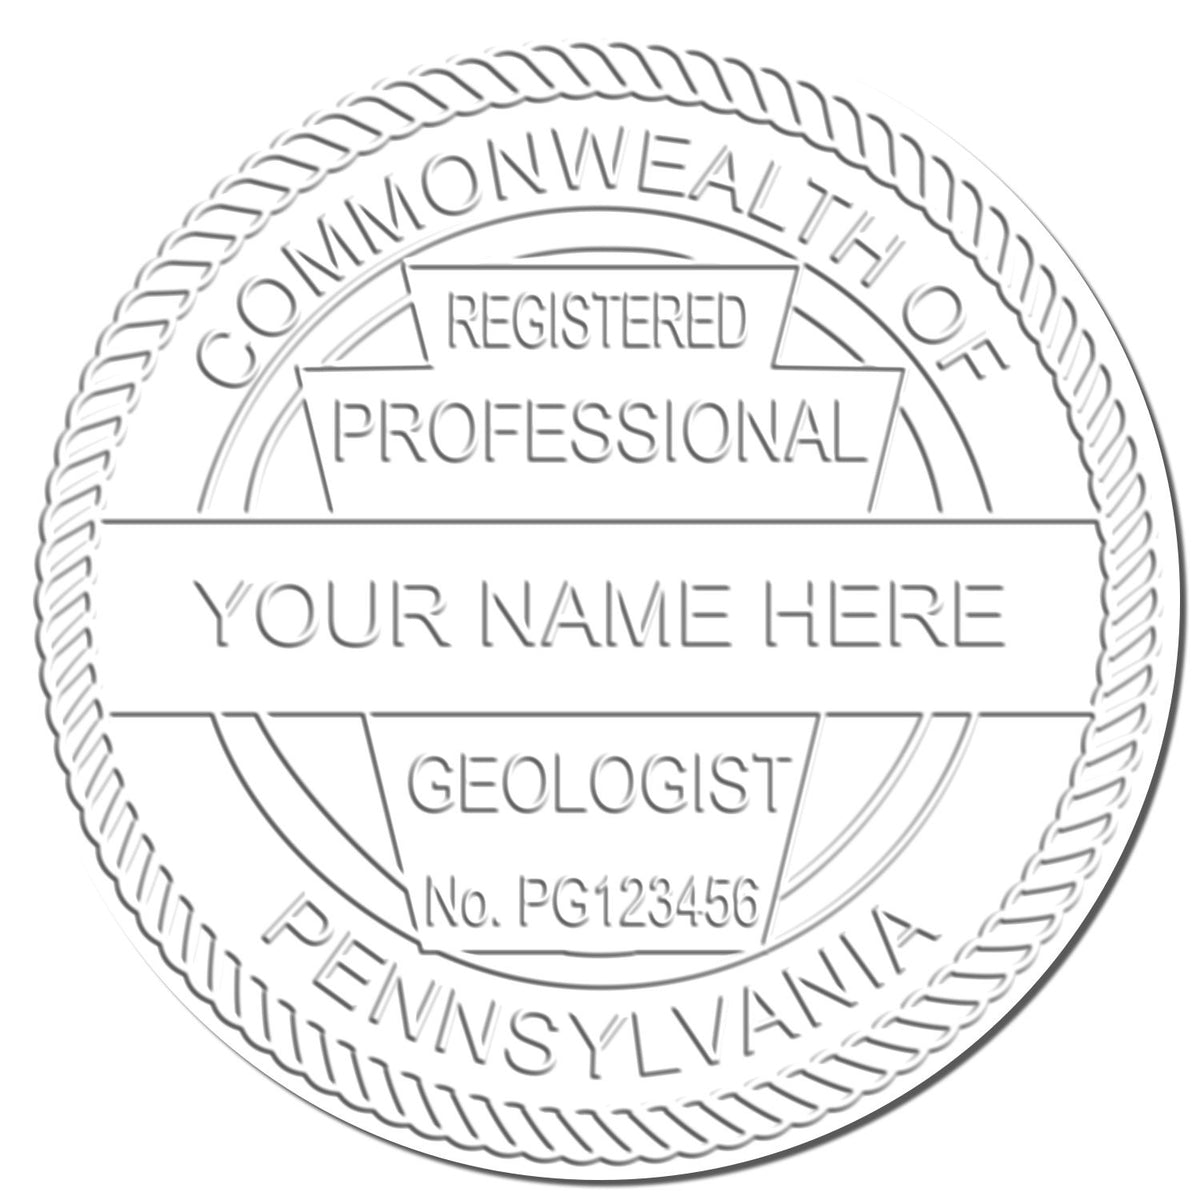 A stamped imprint of the Soft Pennsylvania Professional Geologist Seal in this stylish lifestyle photo, setting the tone for a unique and personalized product.